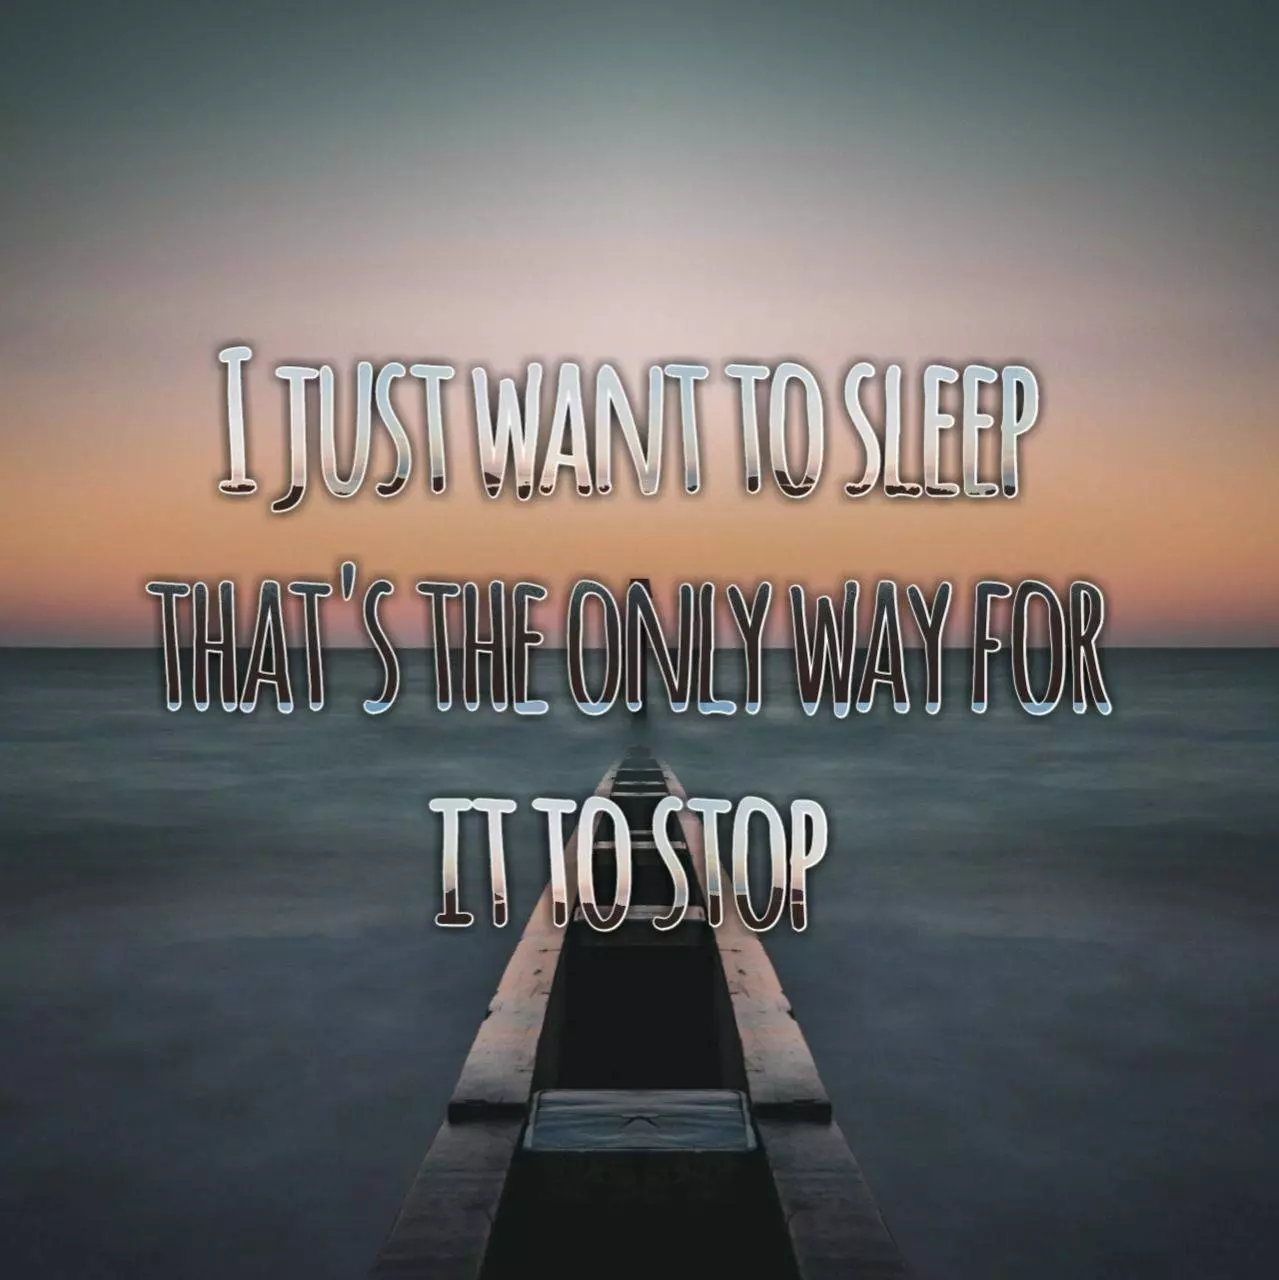 I just want to sleep, that's the only way for it to stop - Depressing